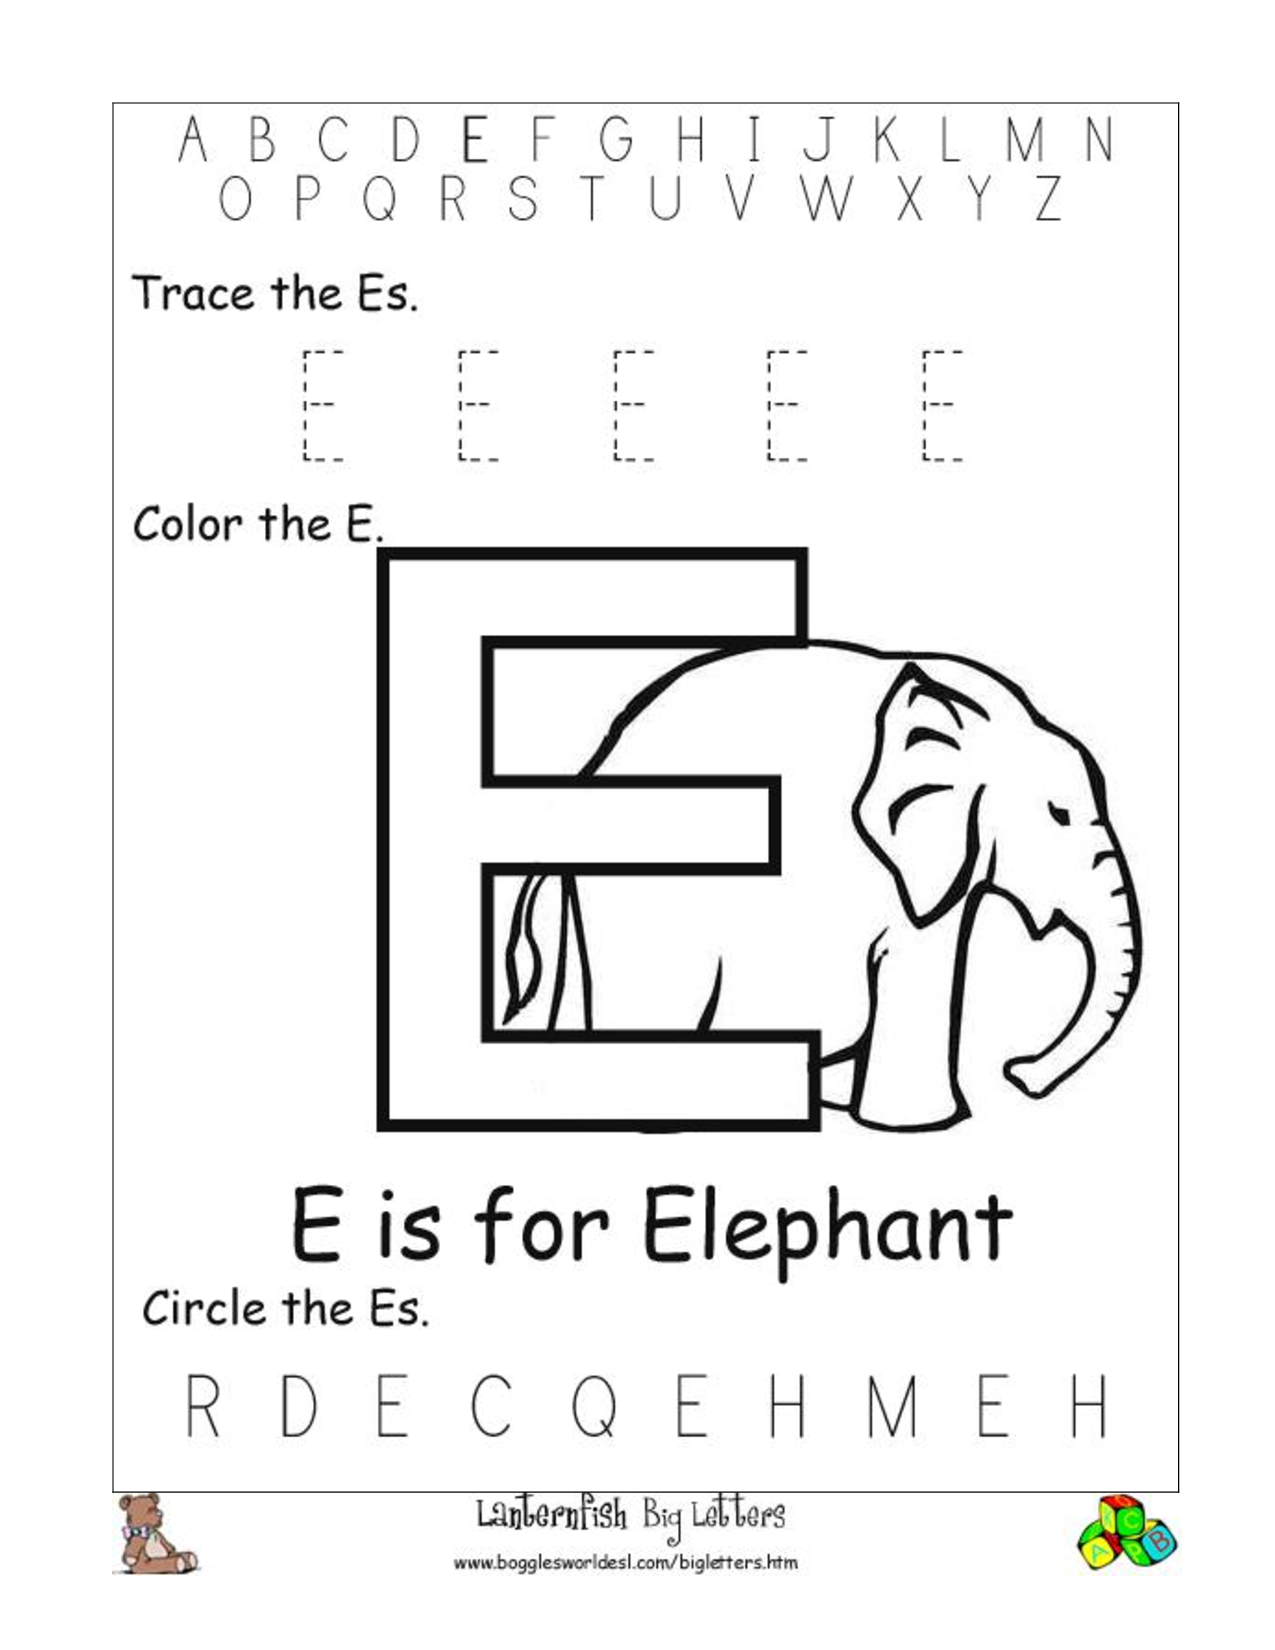 coloring-abc-letters-coloring-pages